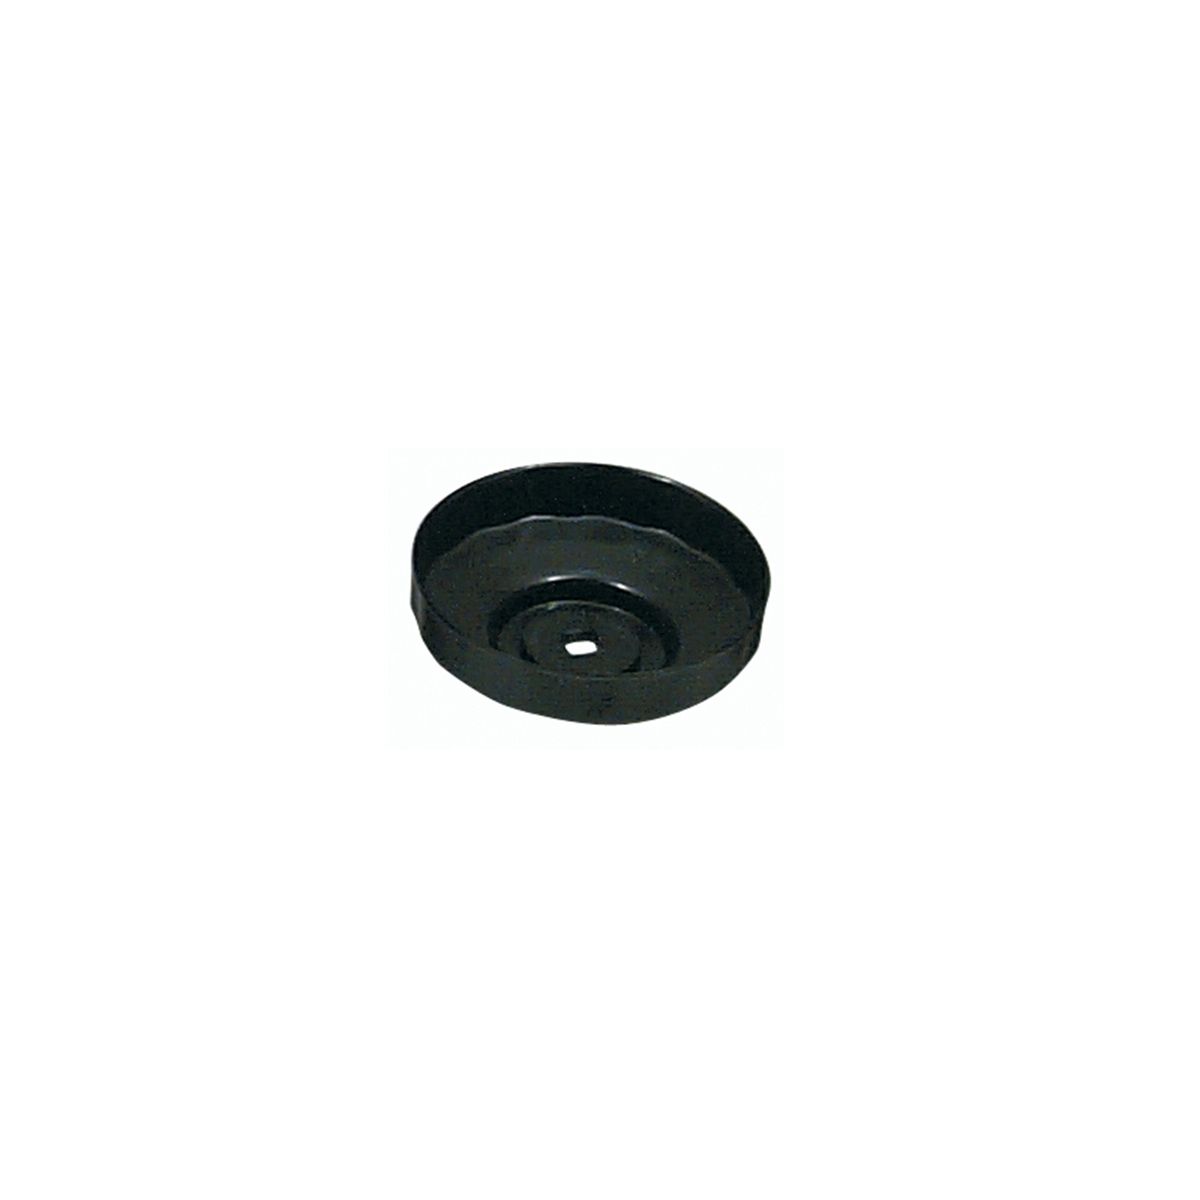 Oil Filter Wrench End Cap 93mm w/ 15 Flutes